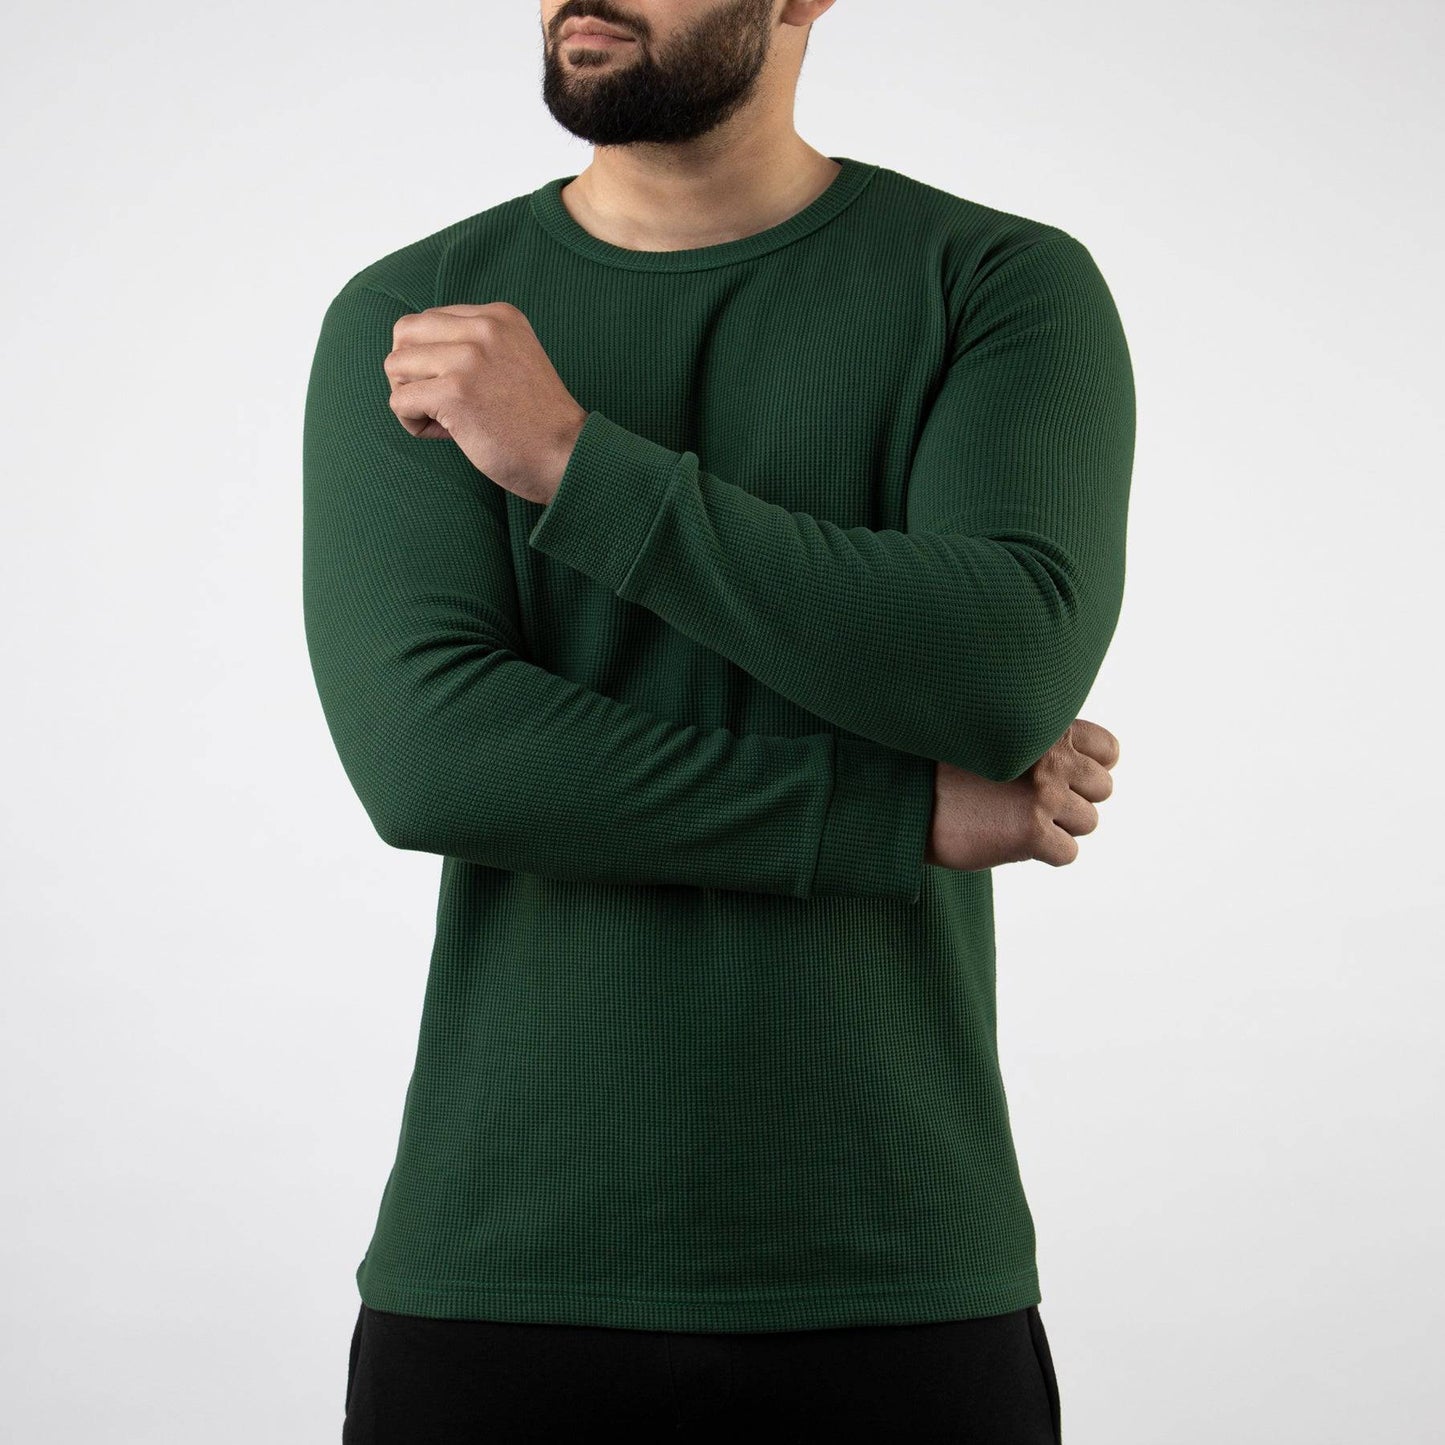 Green Thermal Full Sleeves Waffle-Knit - Valetica Sports